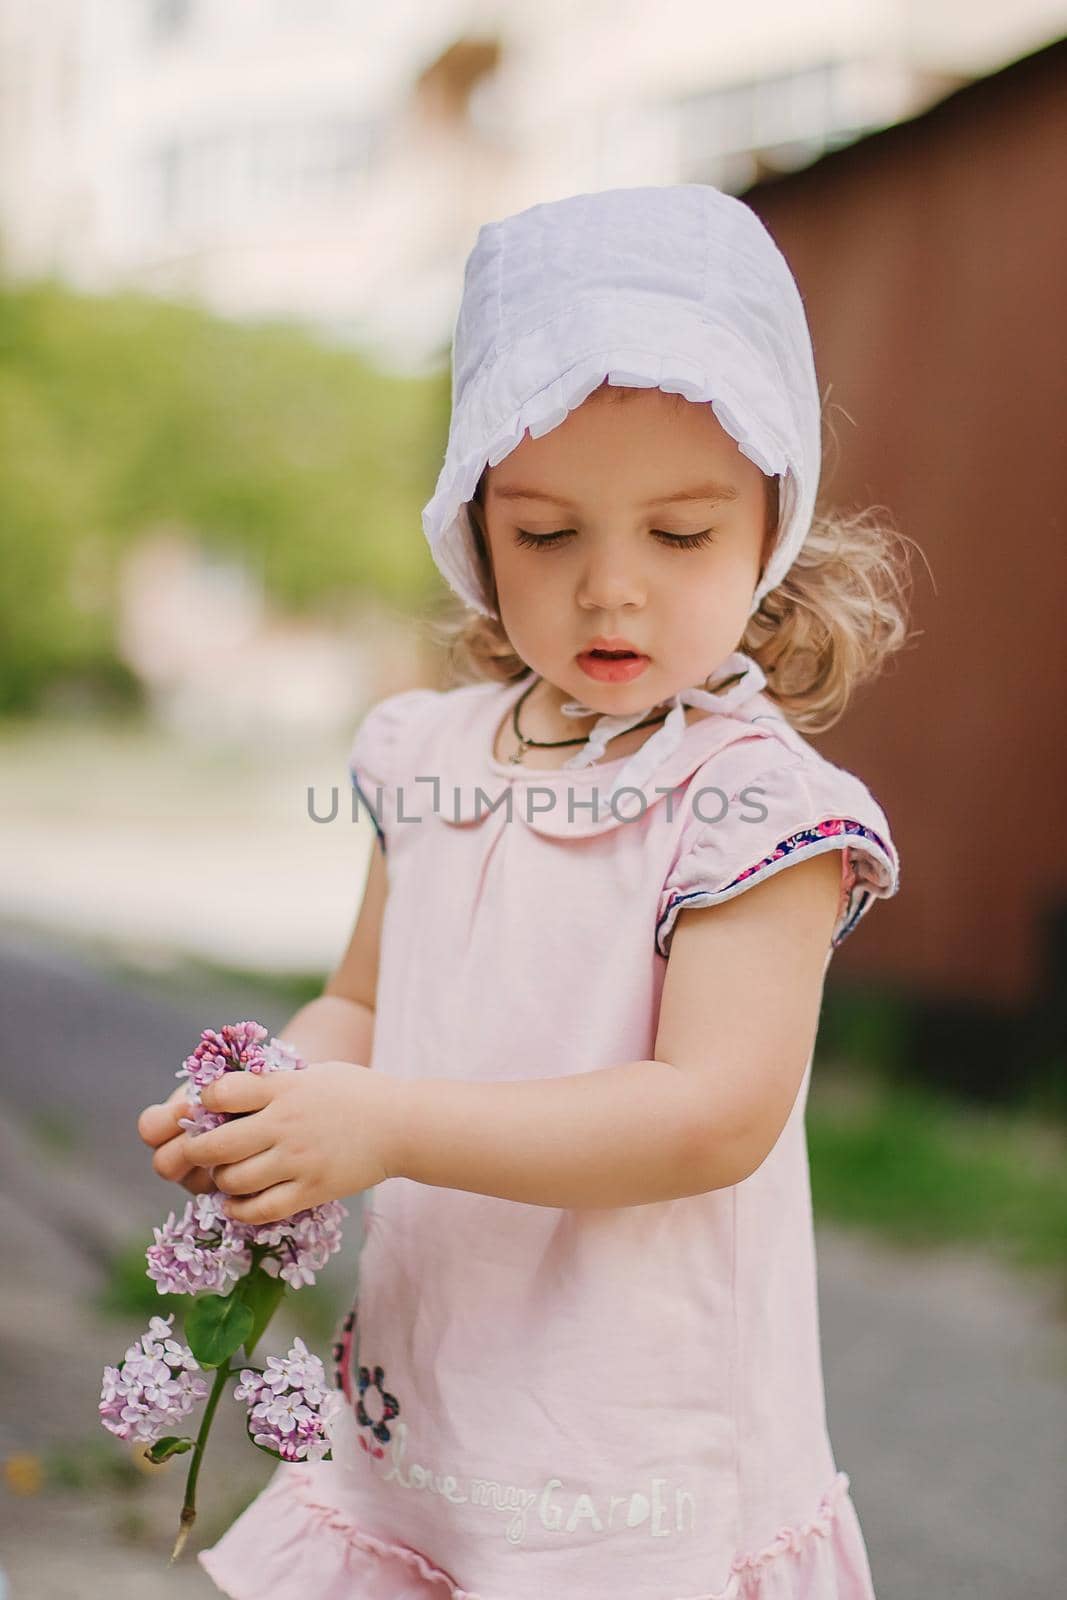 A beautiful little girl in a pink dress holds a branch of lilac flowers. Child in the garden on a background of a wooden fence with flowers in her hands.